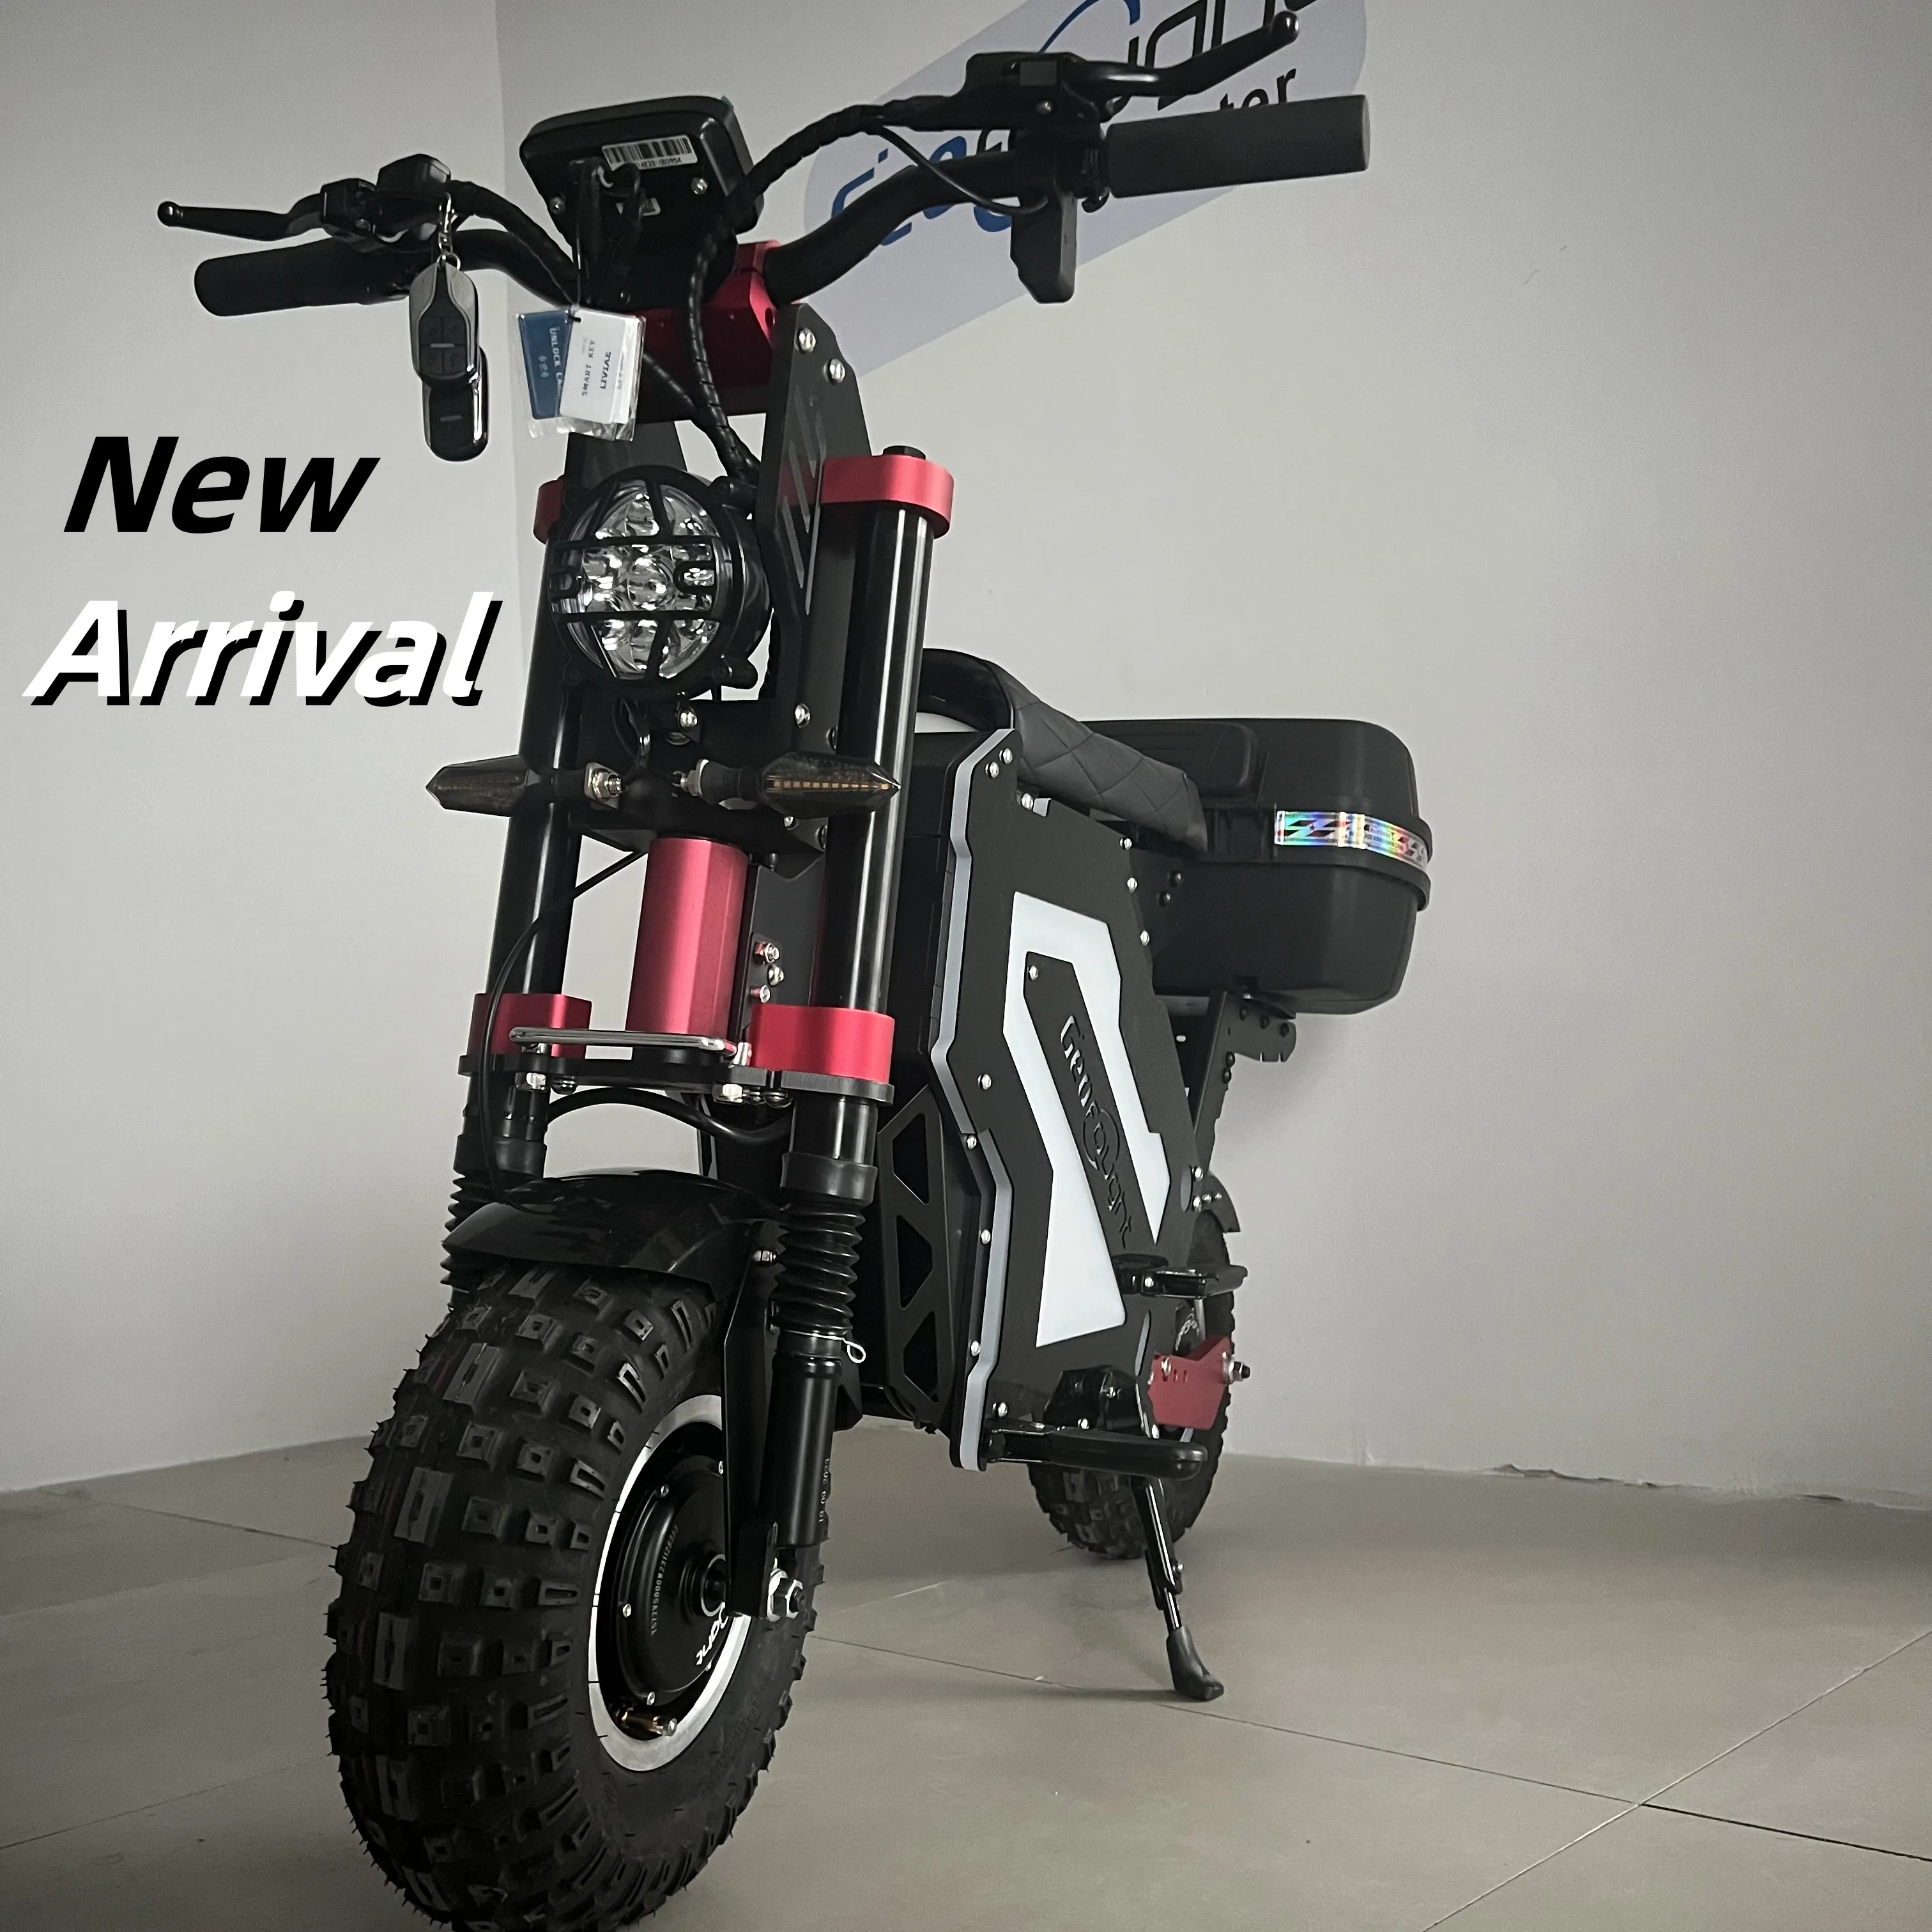 Geofought Molo5 13/14invh tires 72v 10000w 15000w dual motor 30-60Ah electric scooter with seat for adults high speed